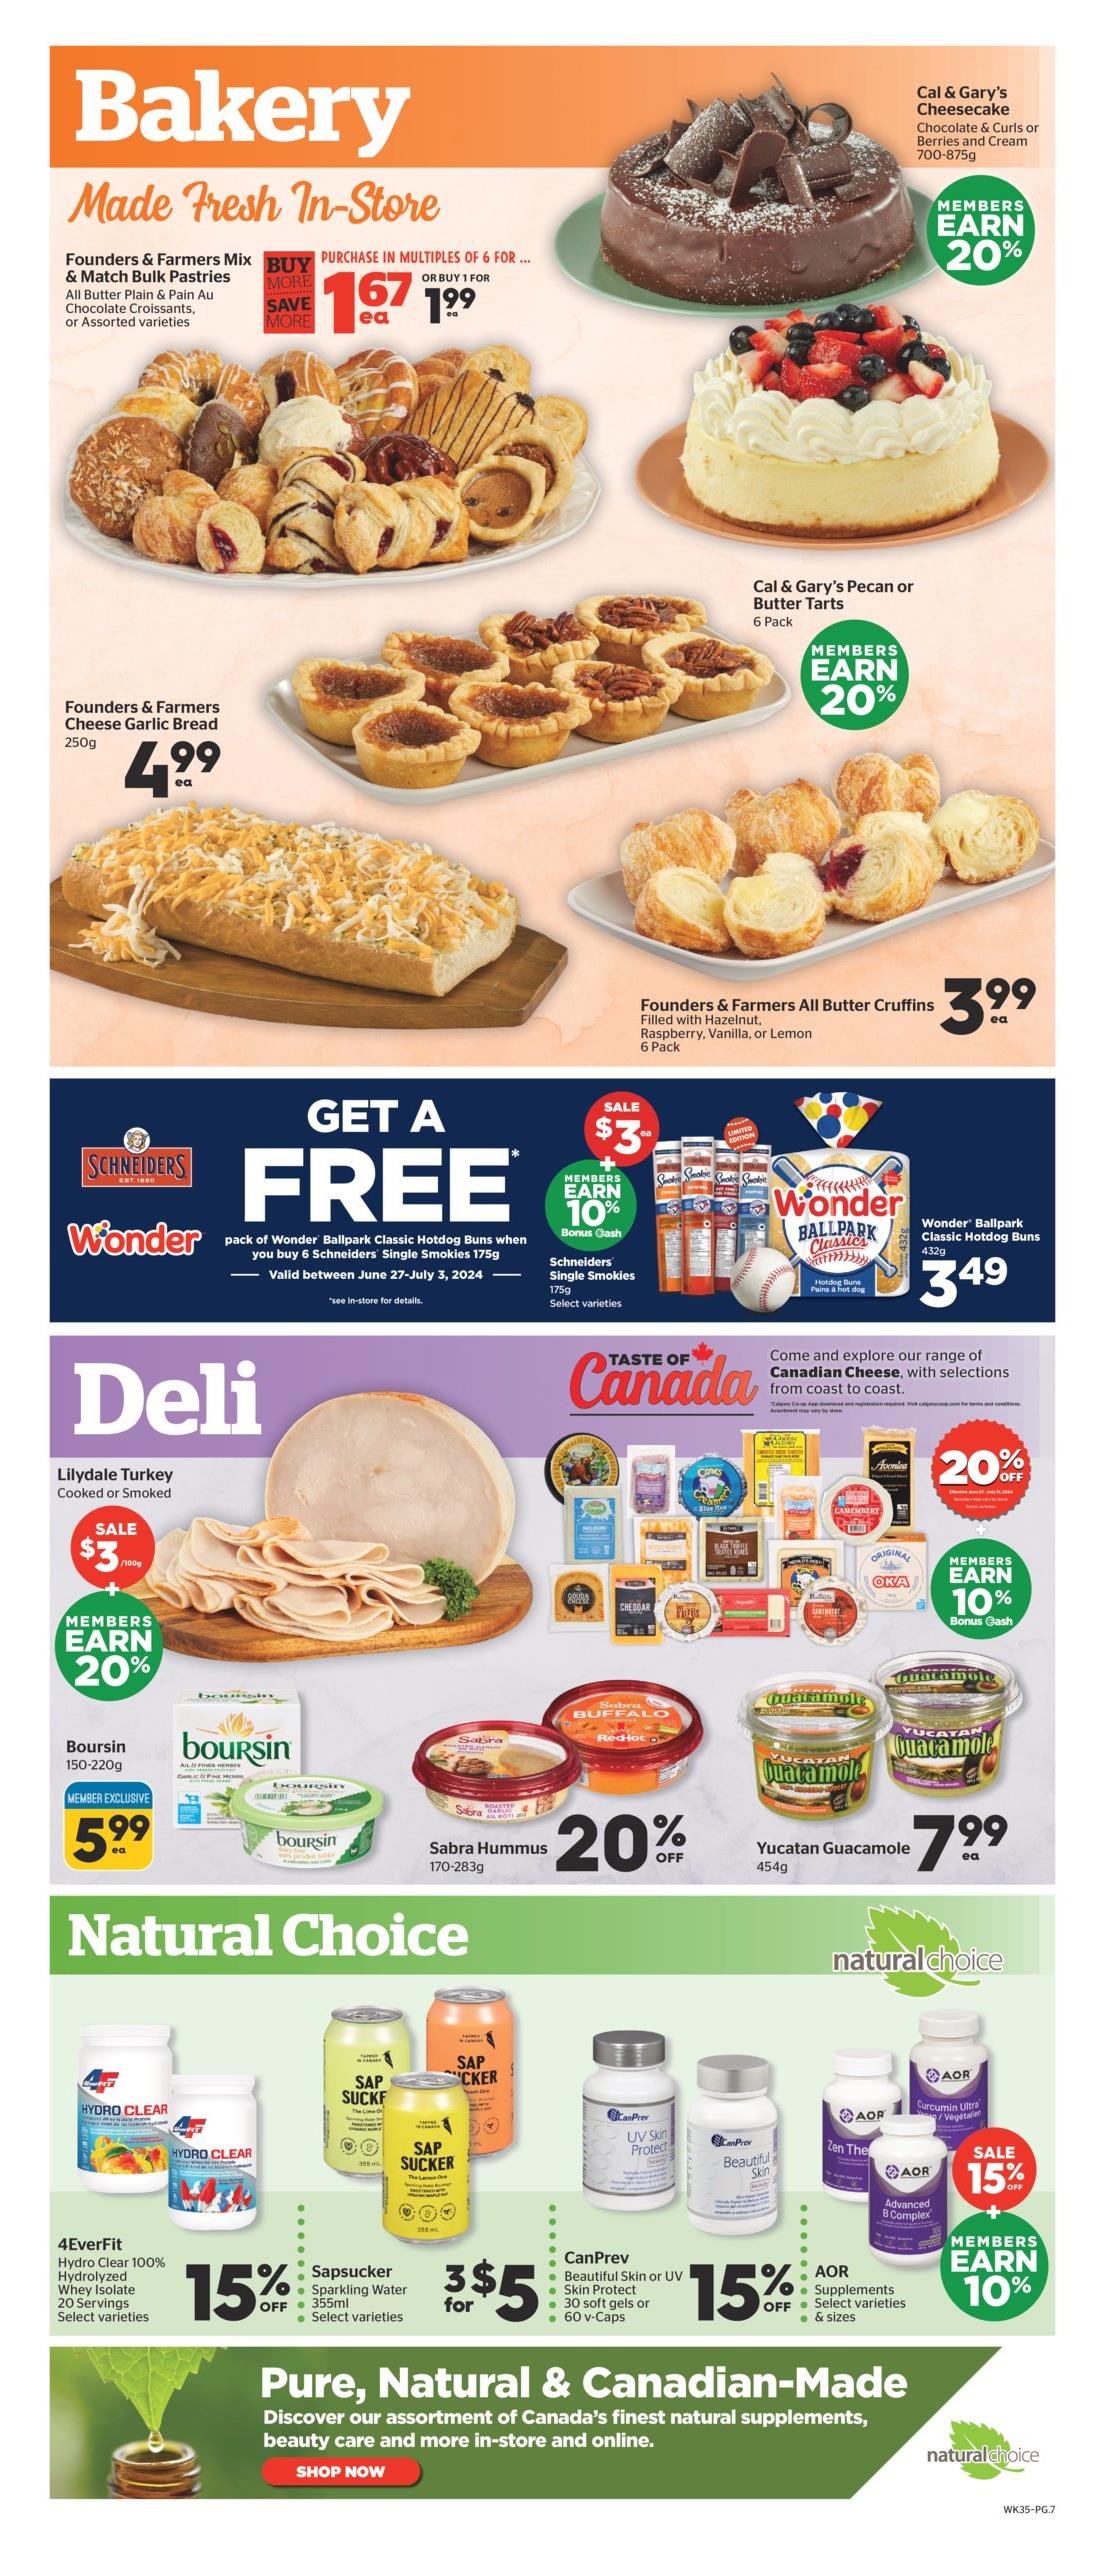 Calgary Co-op - Weekly Flyer Specials - Page 7